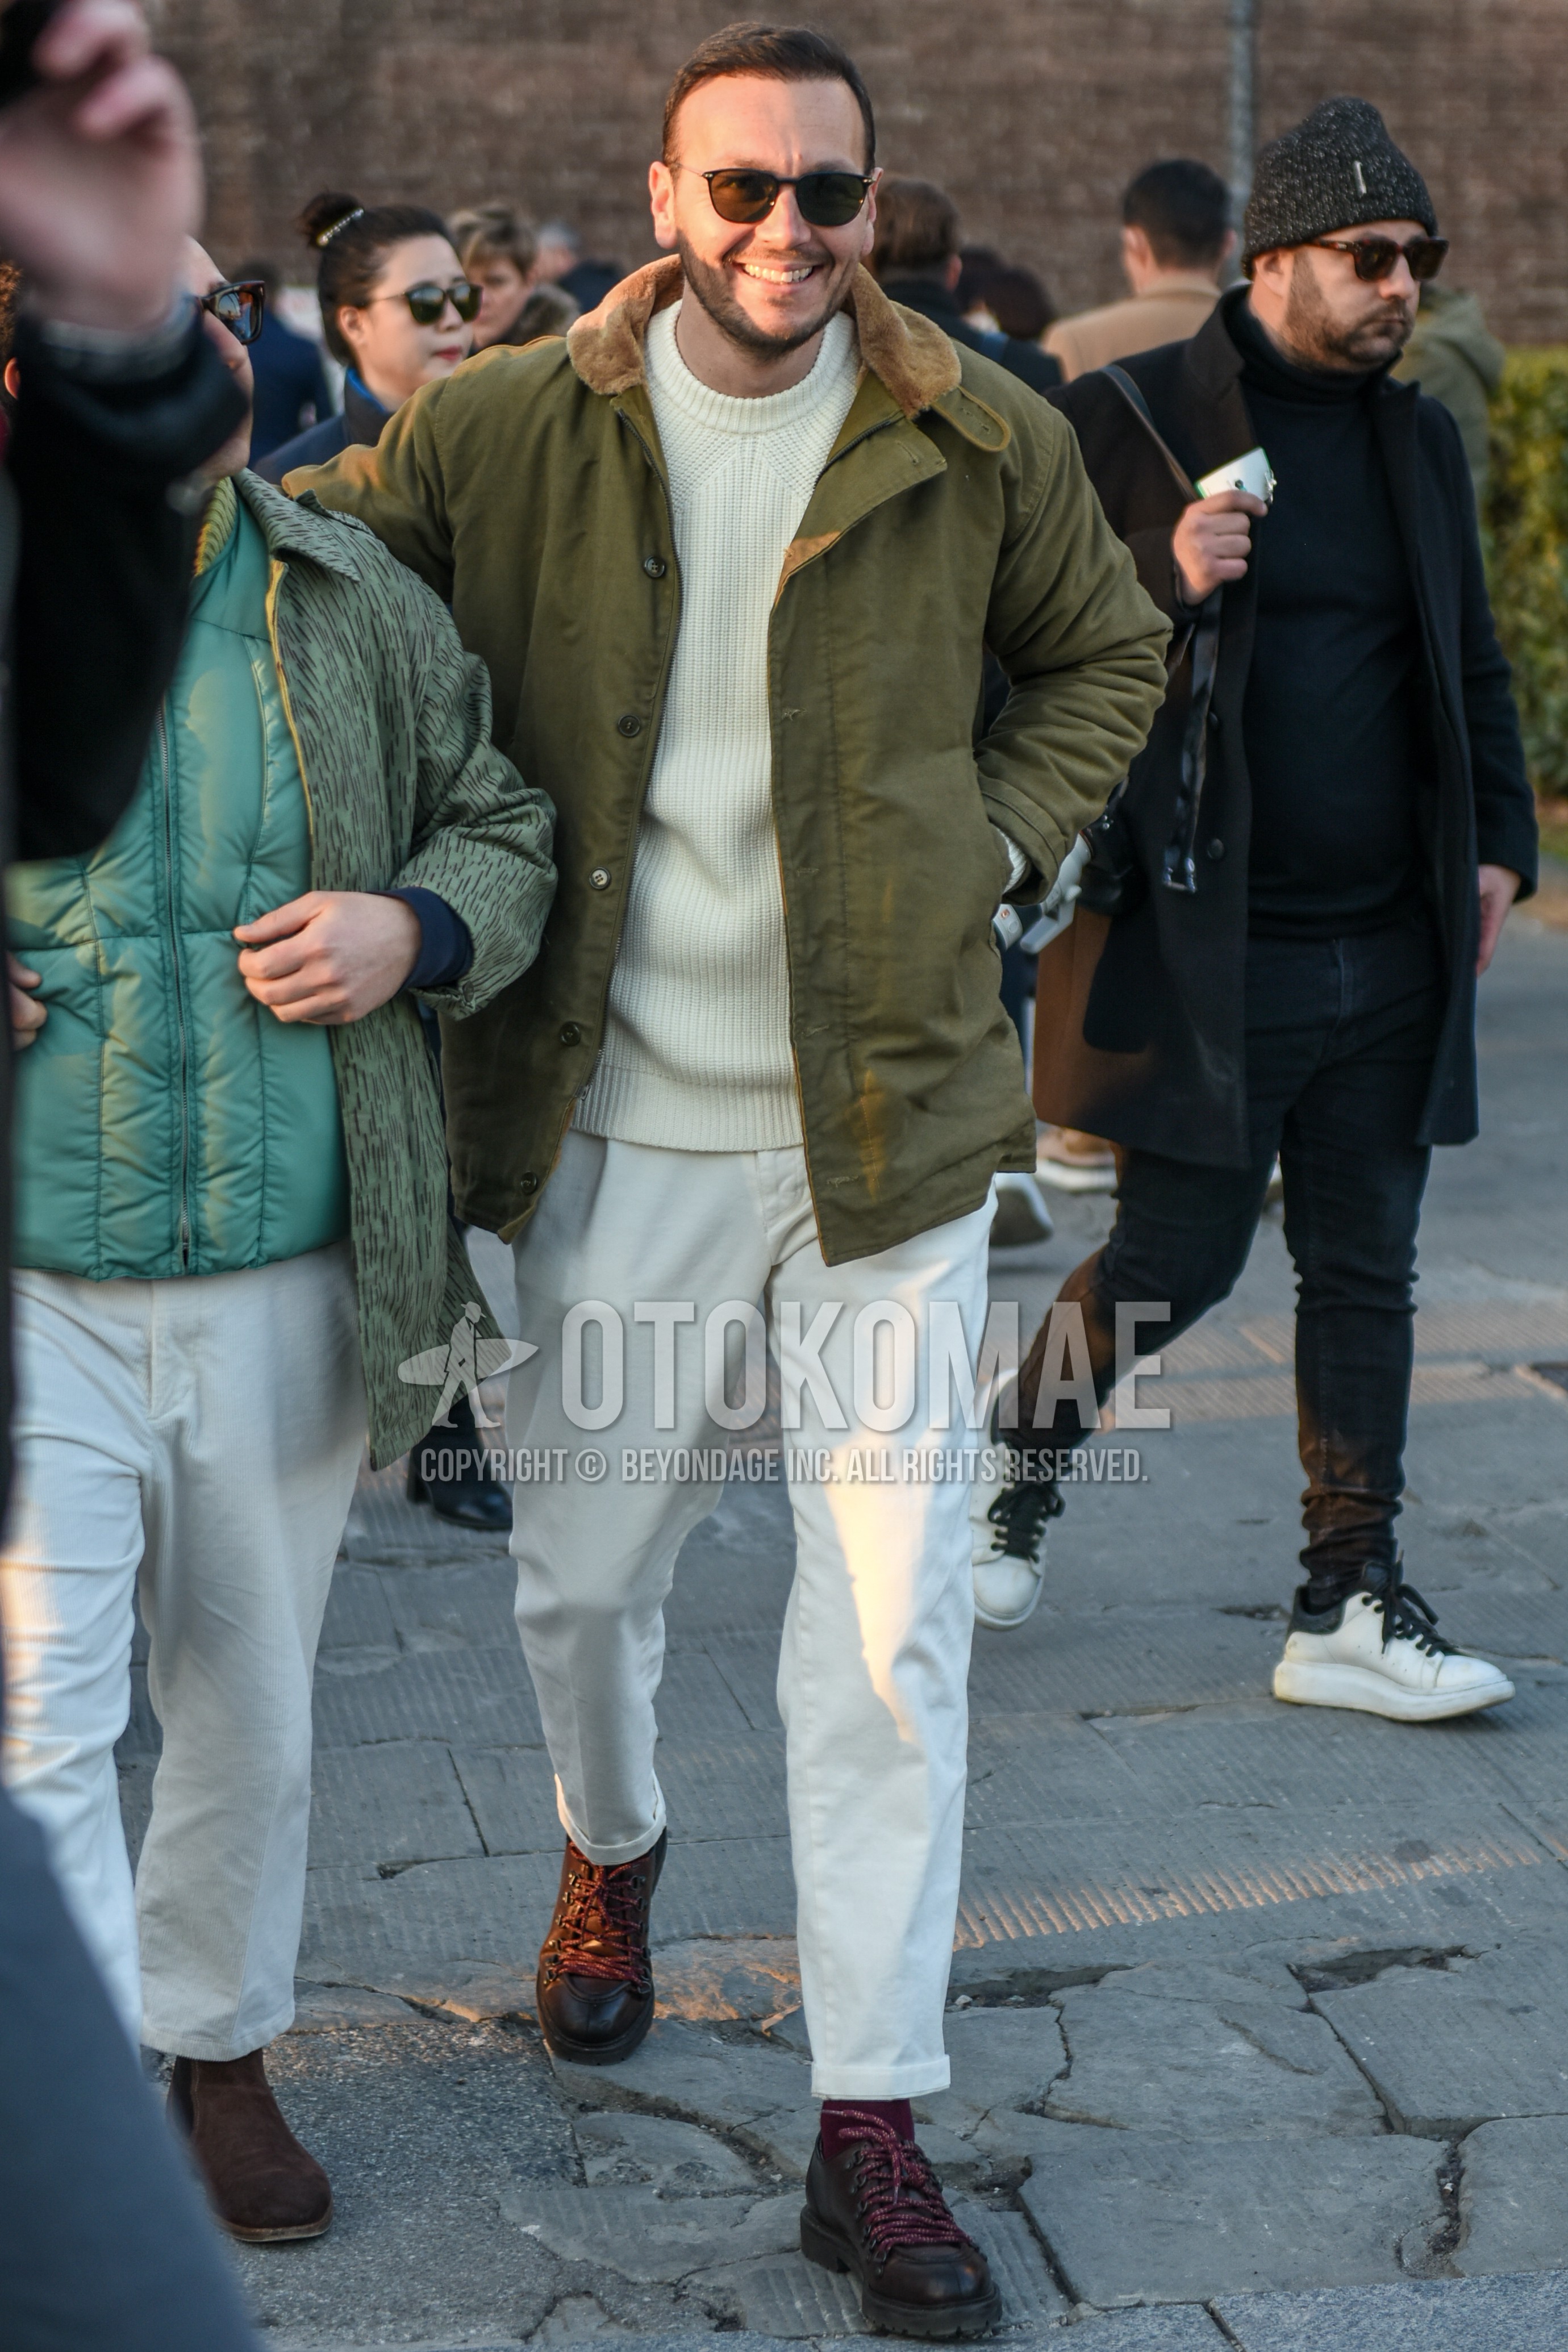 Men's autumn winter outfit with black plain sunglasses, olive green plain field jacket/hunting jacket, white plain sweater, white plain cotton pants, brown  boots.